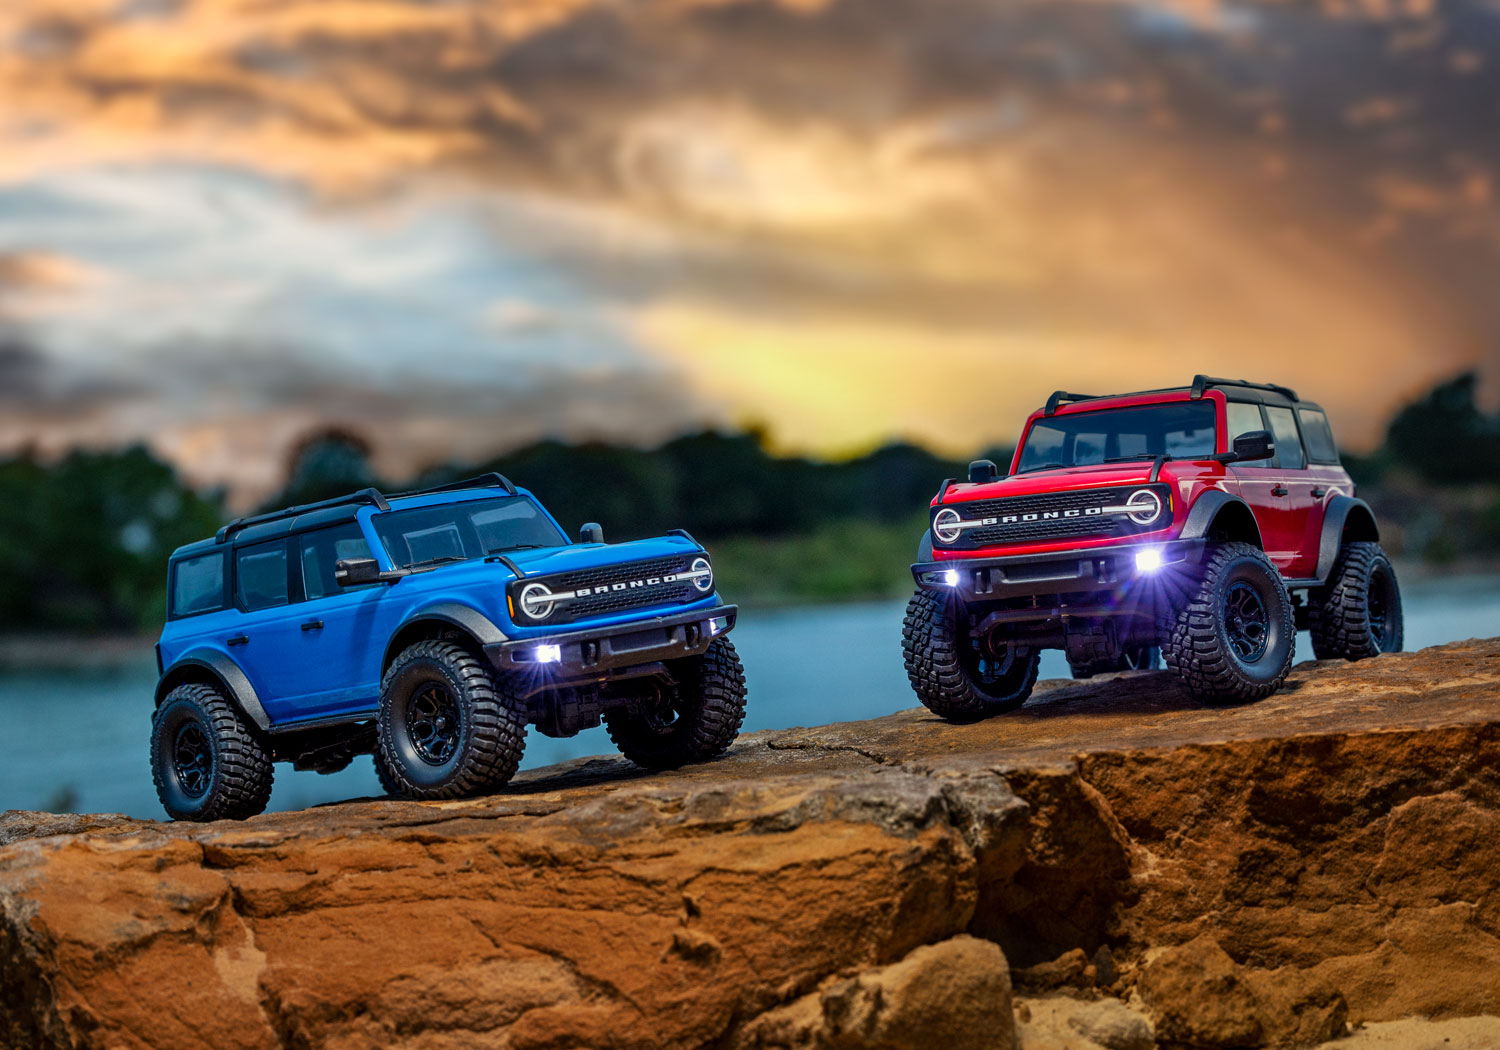 TRAXXAS TRX-4M Land Rover Defender / Ford Bronco 1/18 4WD RTR Scale Crawler